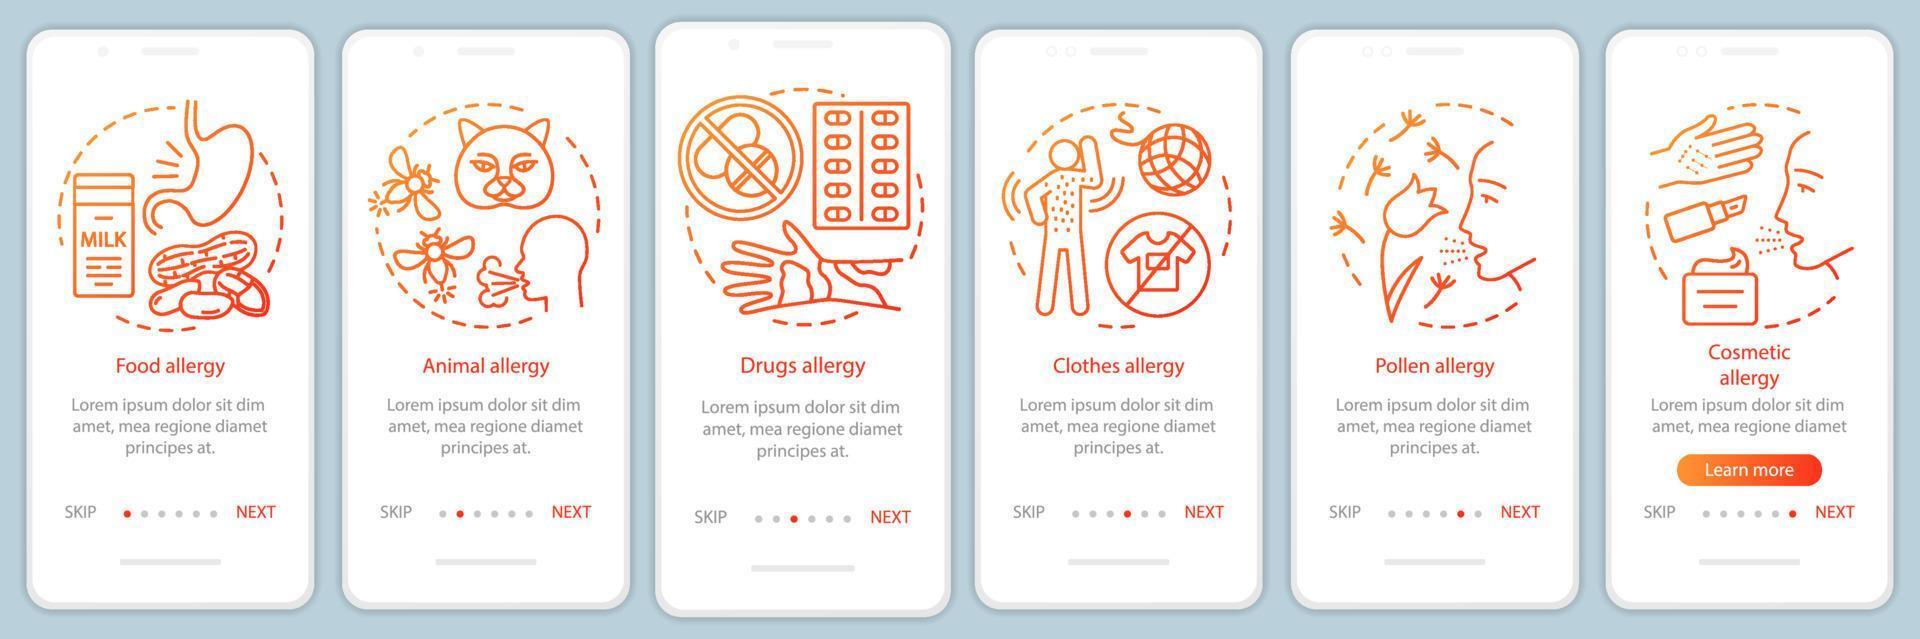 Allergy types onboarding mobile app page screen vector template. Food, animal, clothes, pollen allergies. Walkthrough website steps with linear illustrations. UX, UI, GUI smartphone interface concept